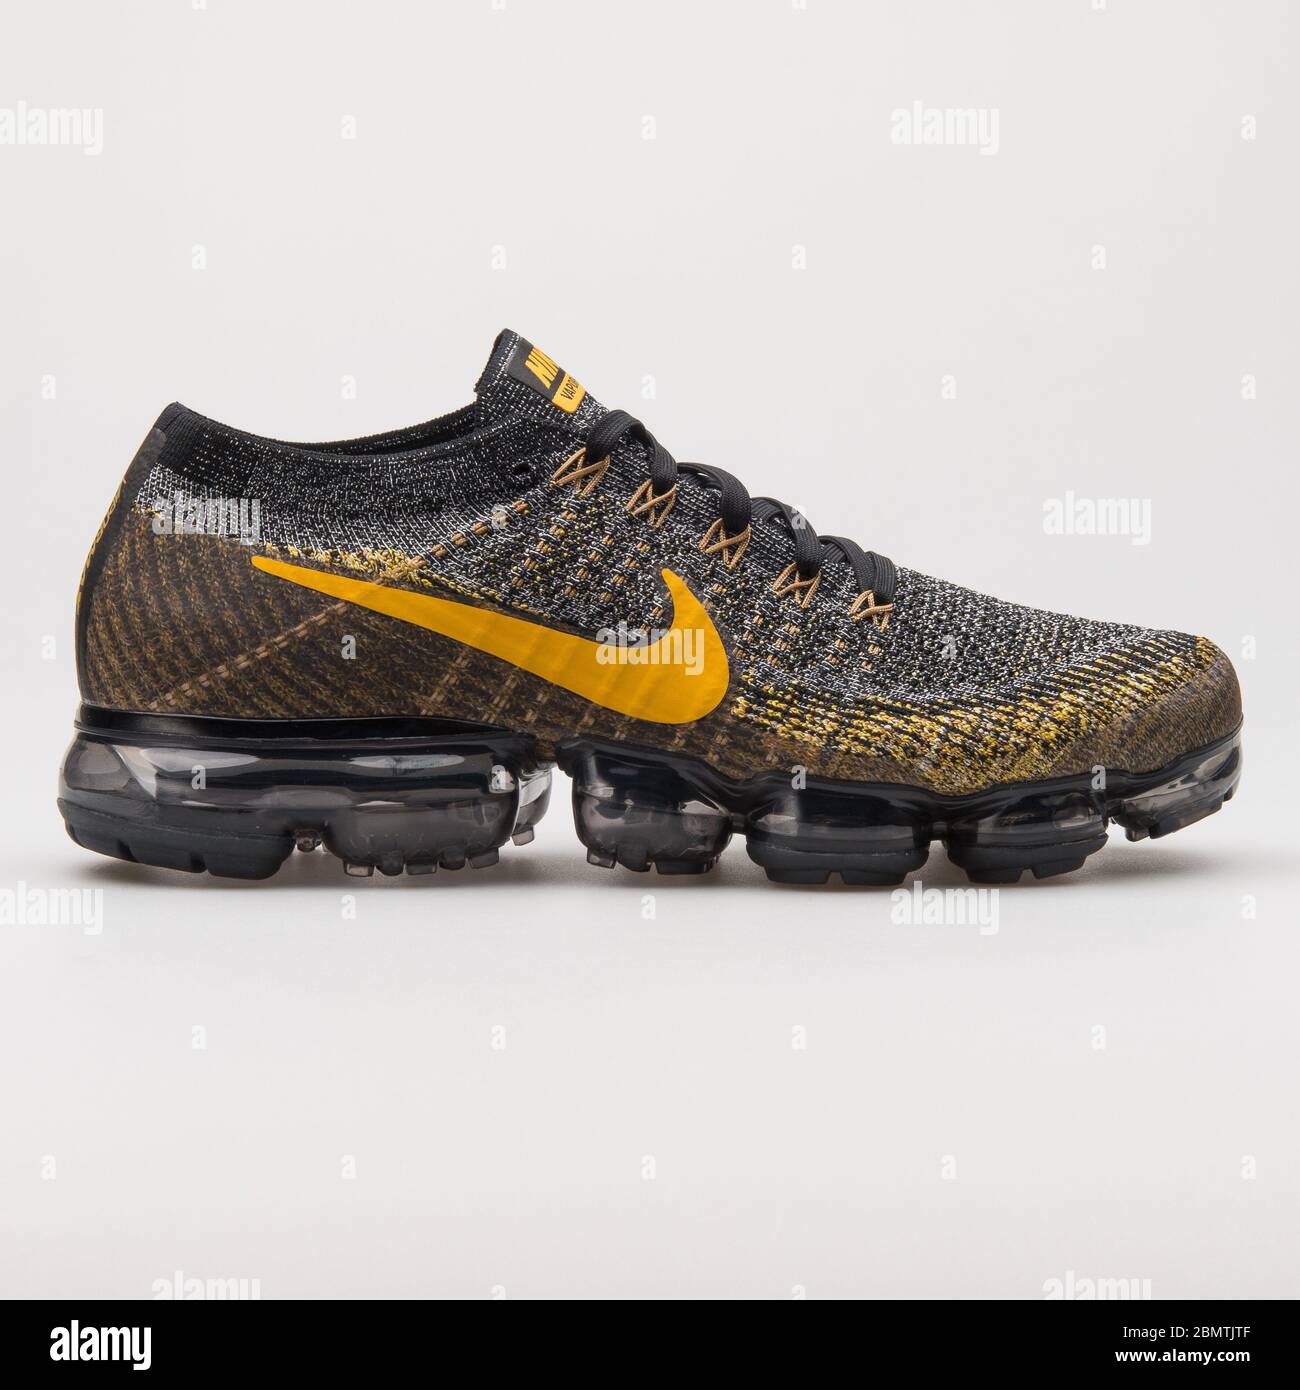 VIENNA, AUSTRIA - FEBRUARY 19, 2018: Nike Air Vapormax Flyknit black, grey  and gold sneaker on white background Stock Photo - Alamy